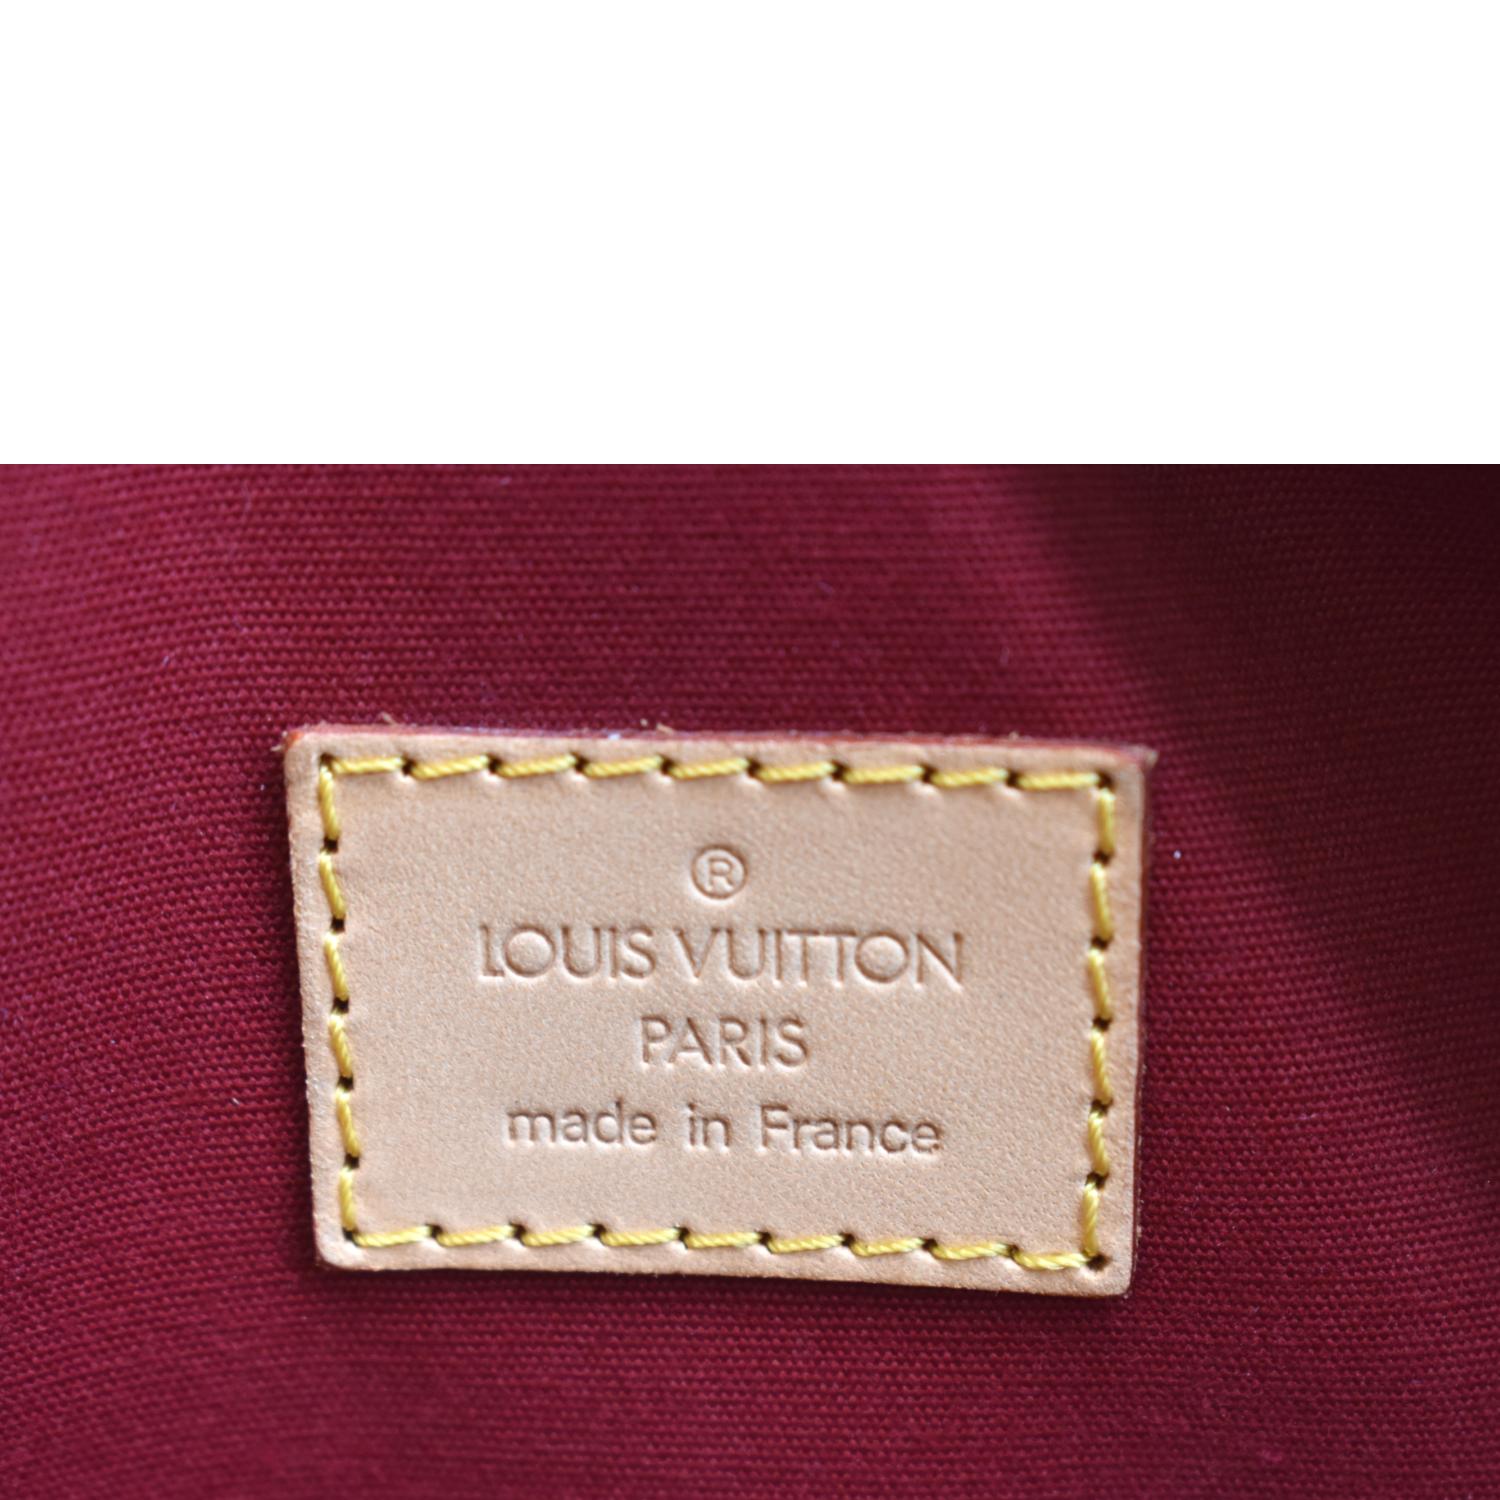 LOUIS VUITTON Vernis Summit Drive Hand Bag Red